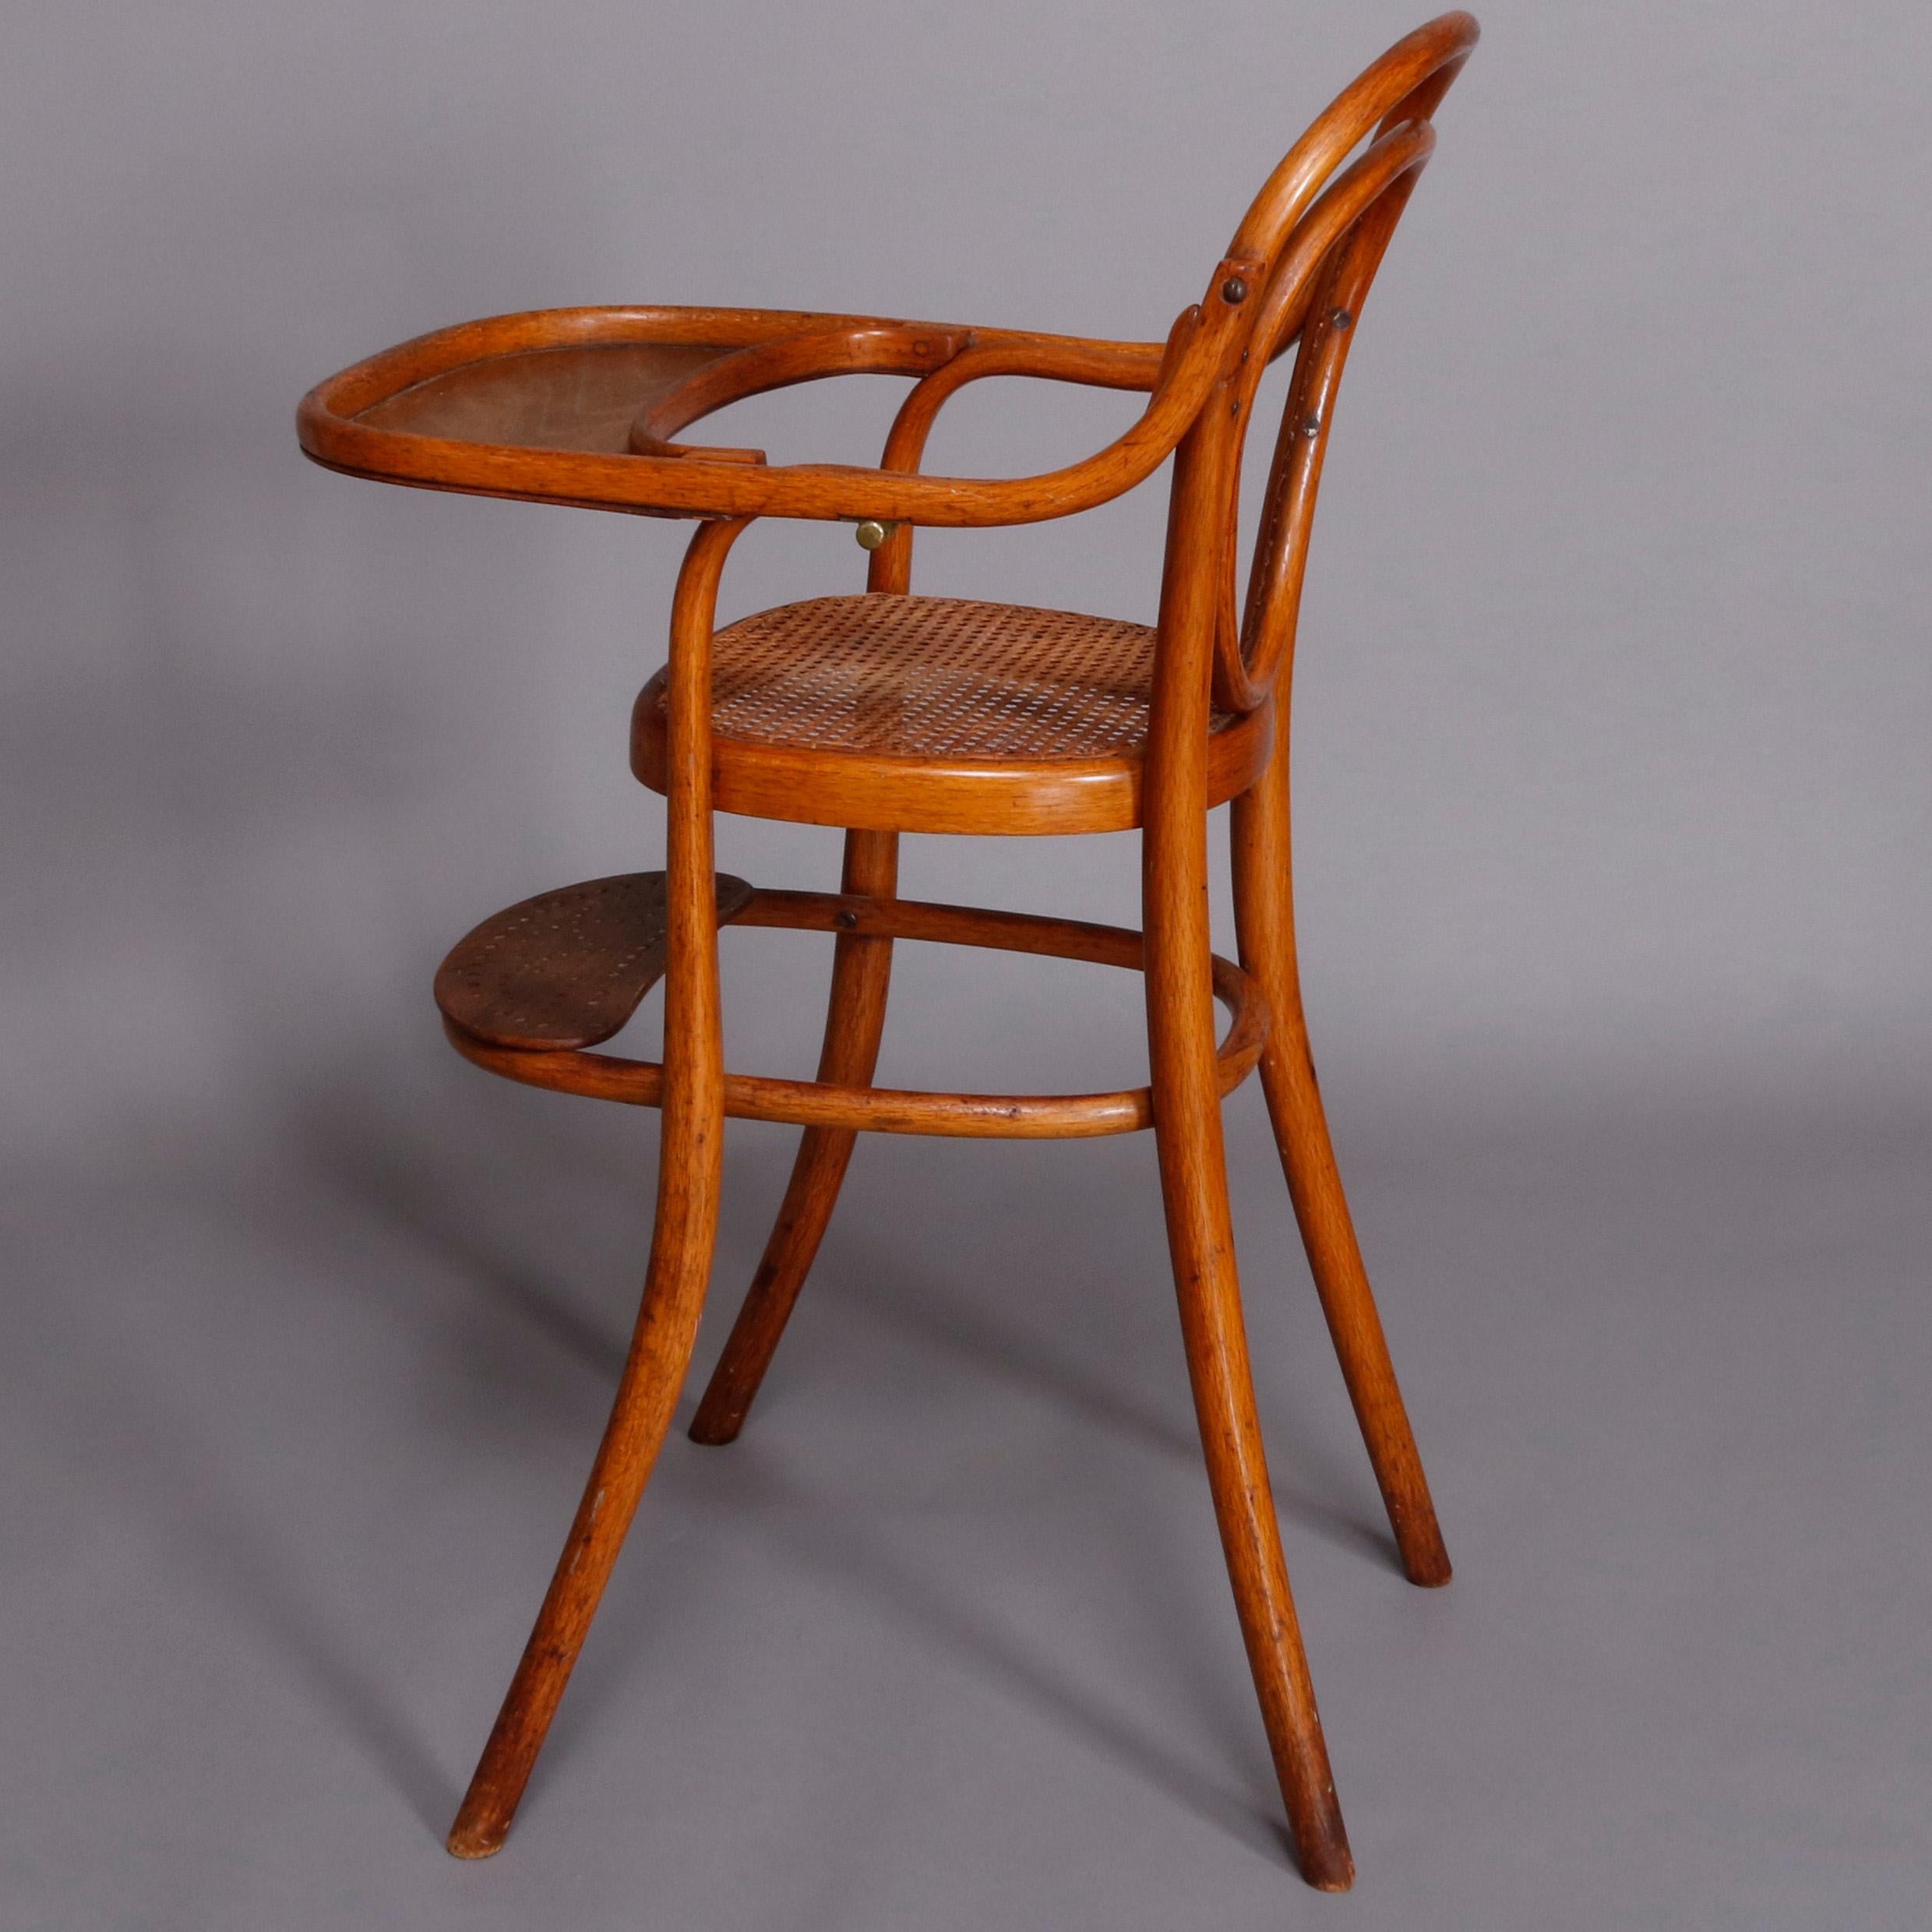 An antique German child's high chair by Michael Thonet offers bentwood construction with caned seat, feeding tray and footrest, original label as photographed, mid-19th century


Measures: 38